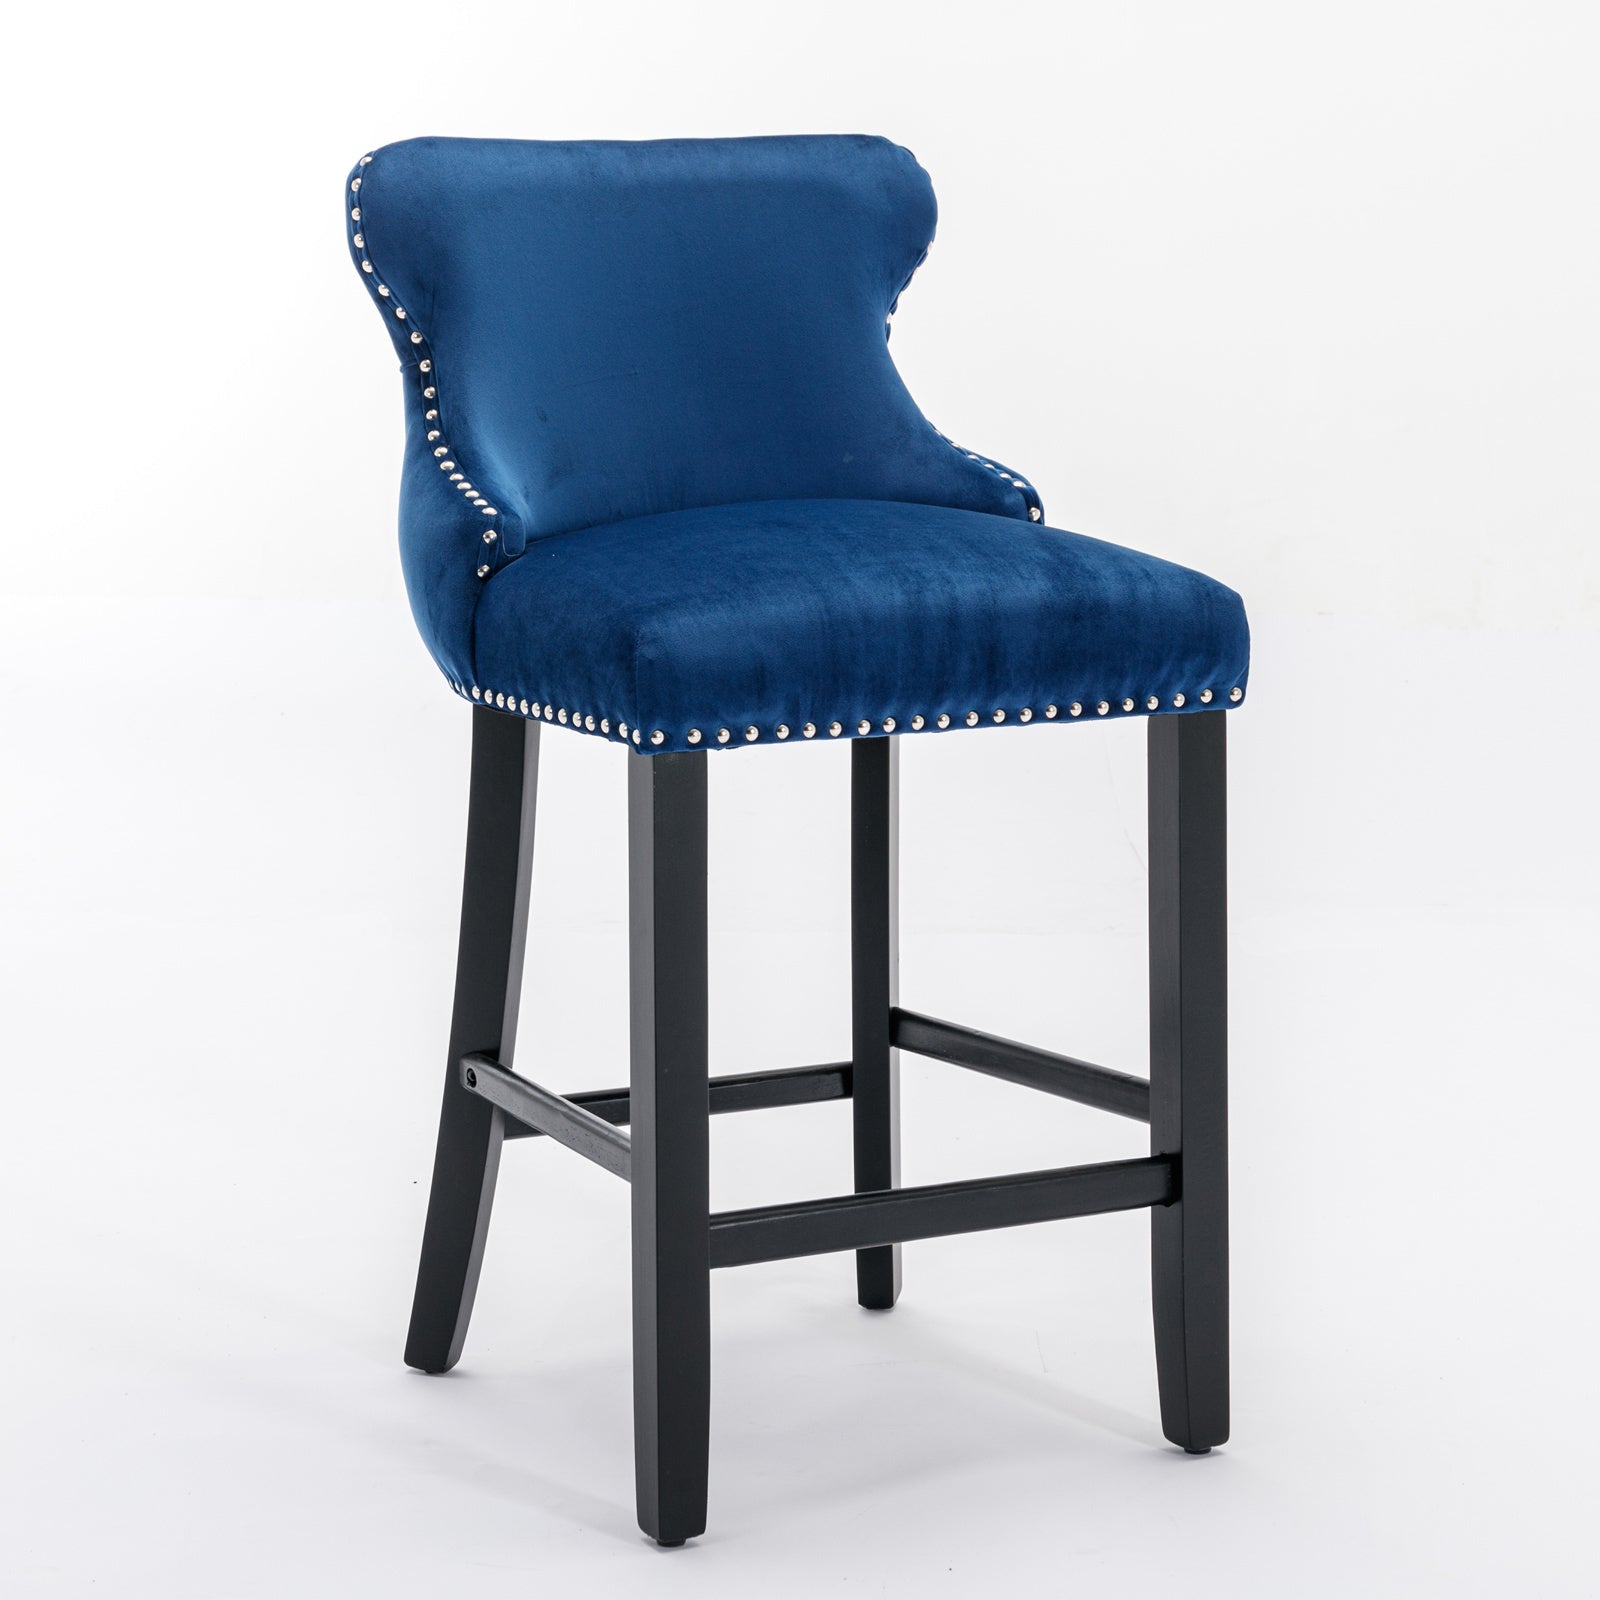 Set of 2 Blue Velvet Counter Stools With Tufted Back and Nailhead Trim